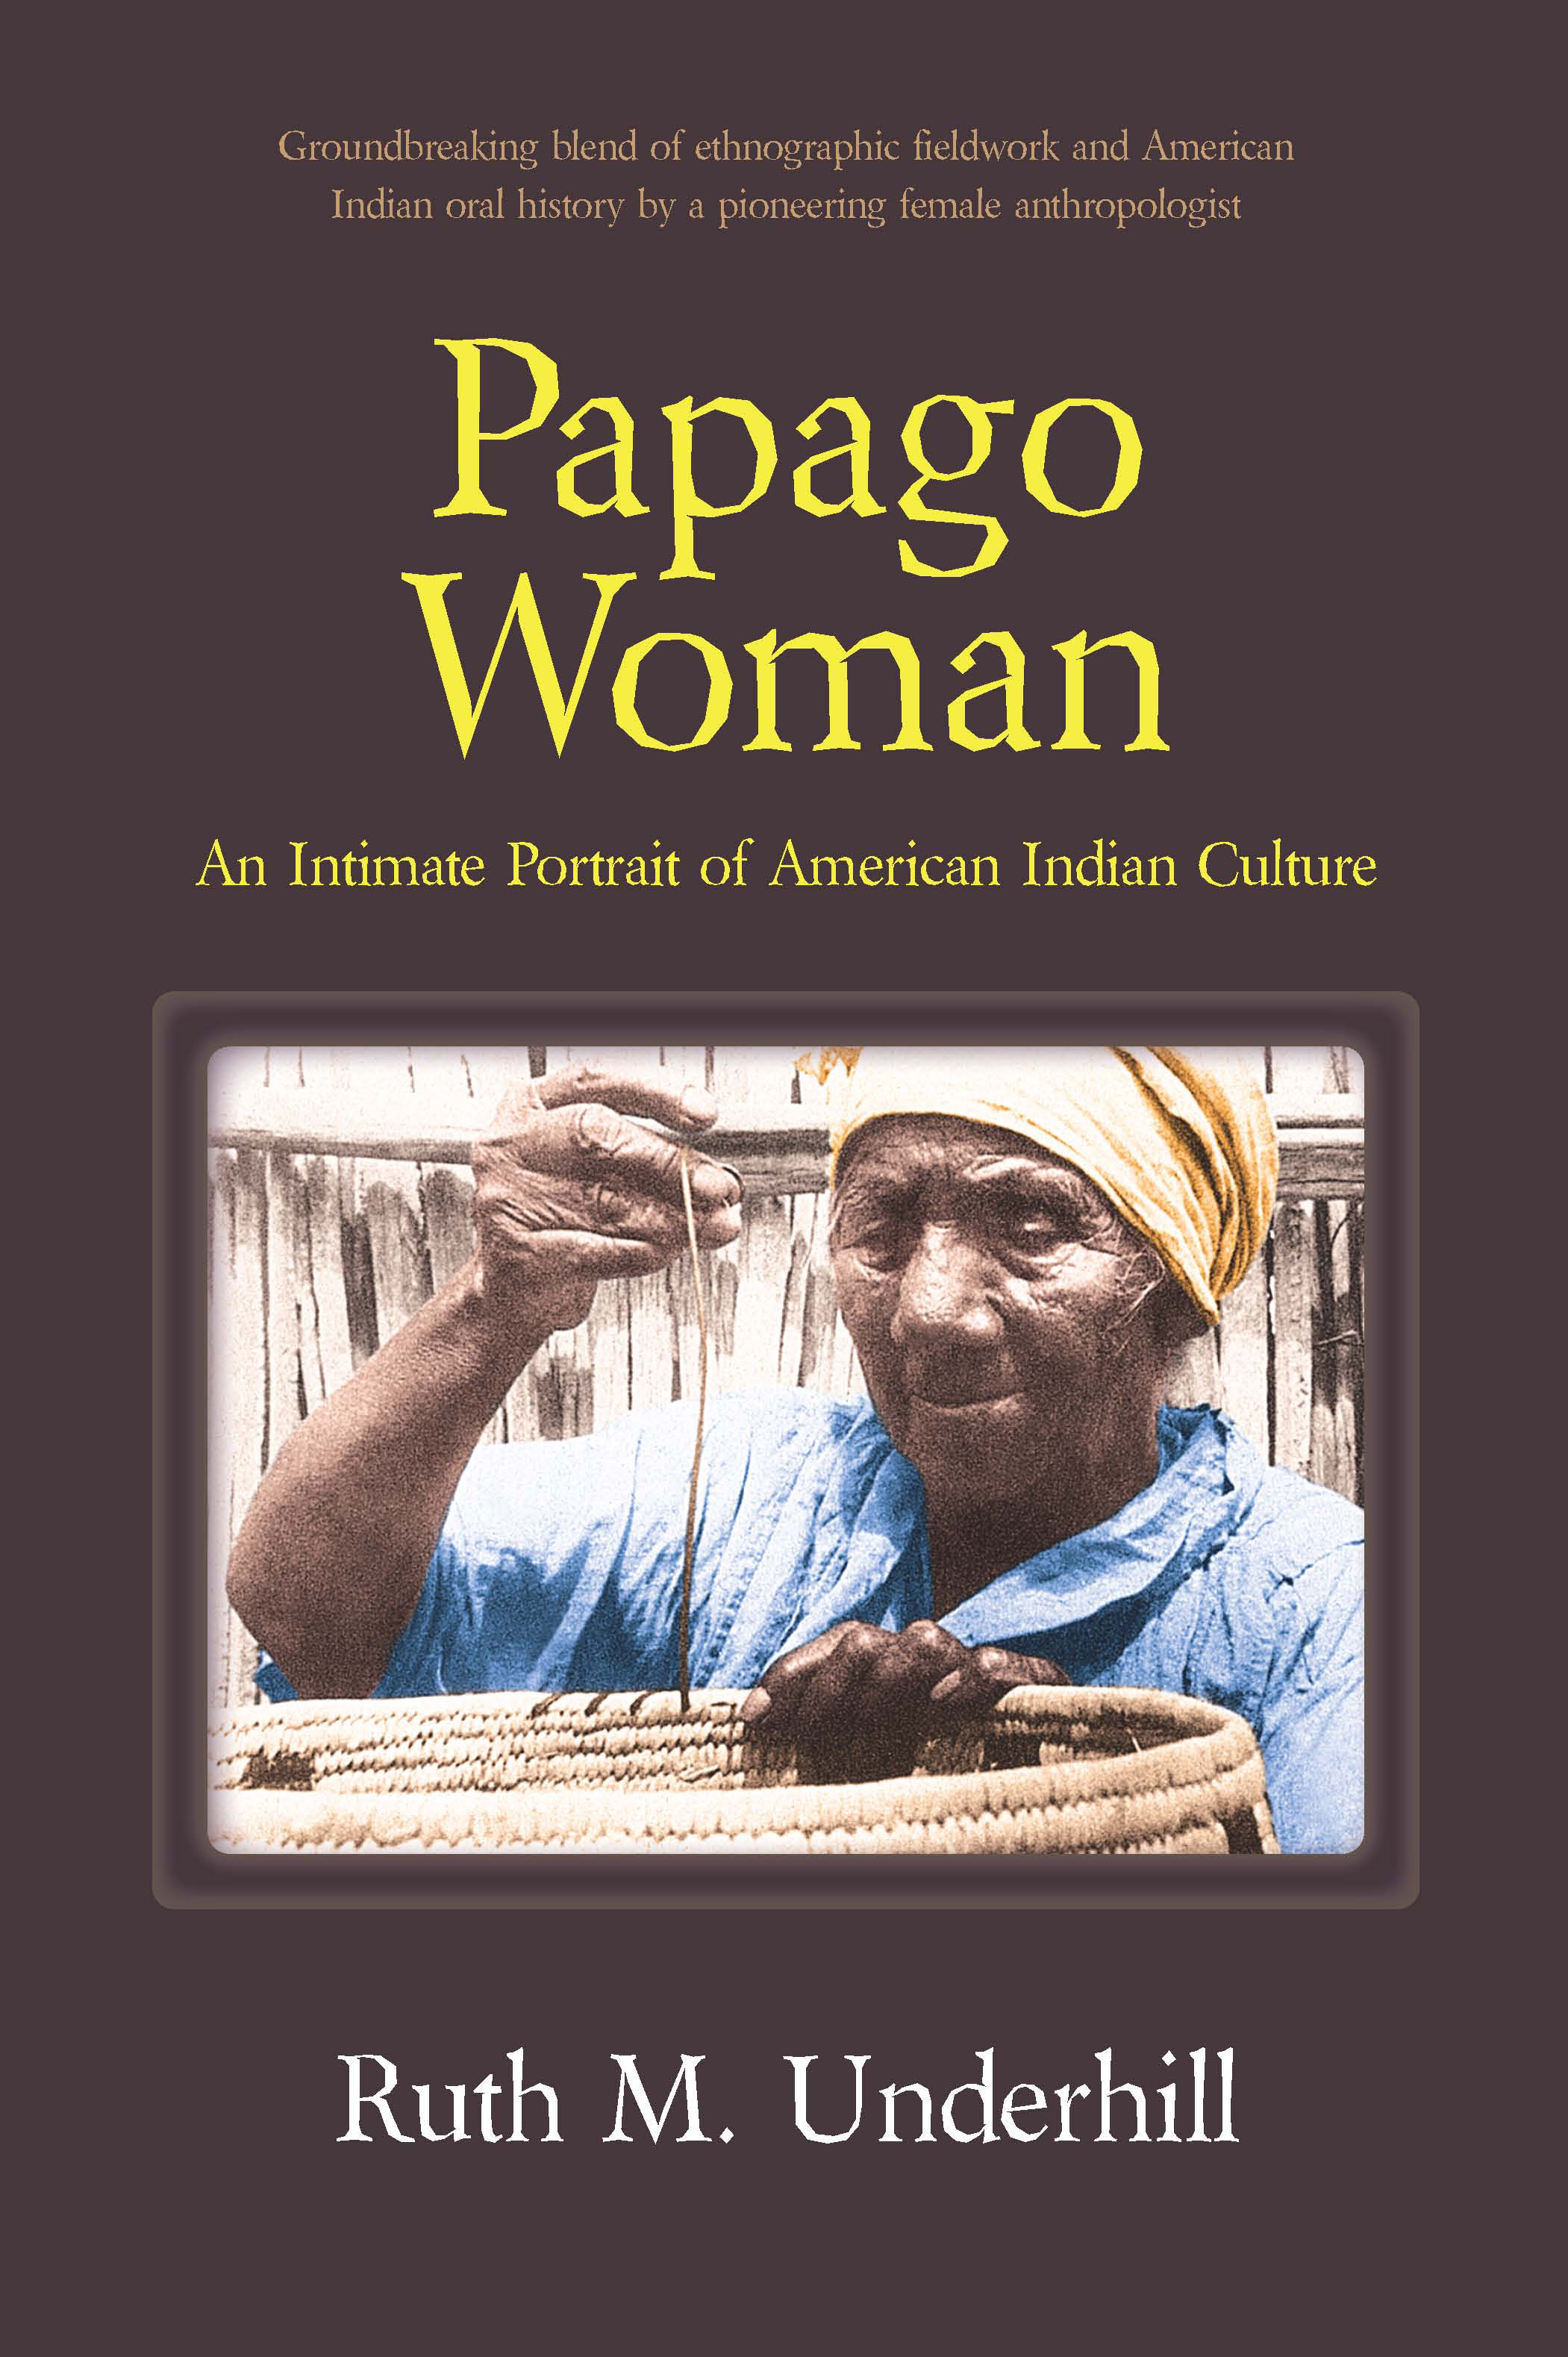 Papago Woman: An Intimate Portrait of American Indian Culture by Ruth M. Underhill